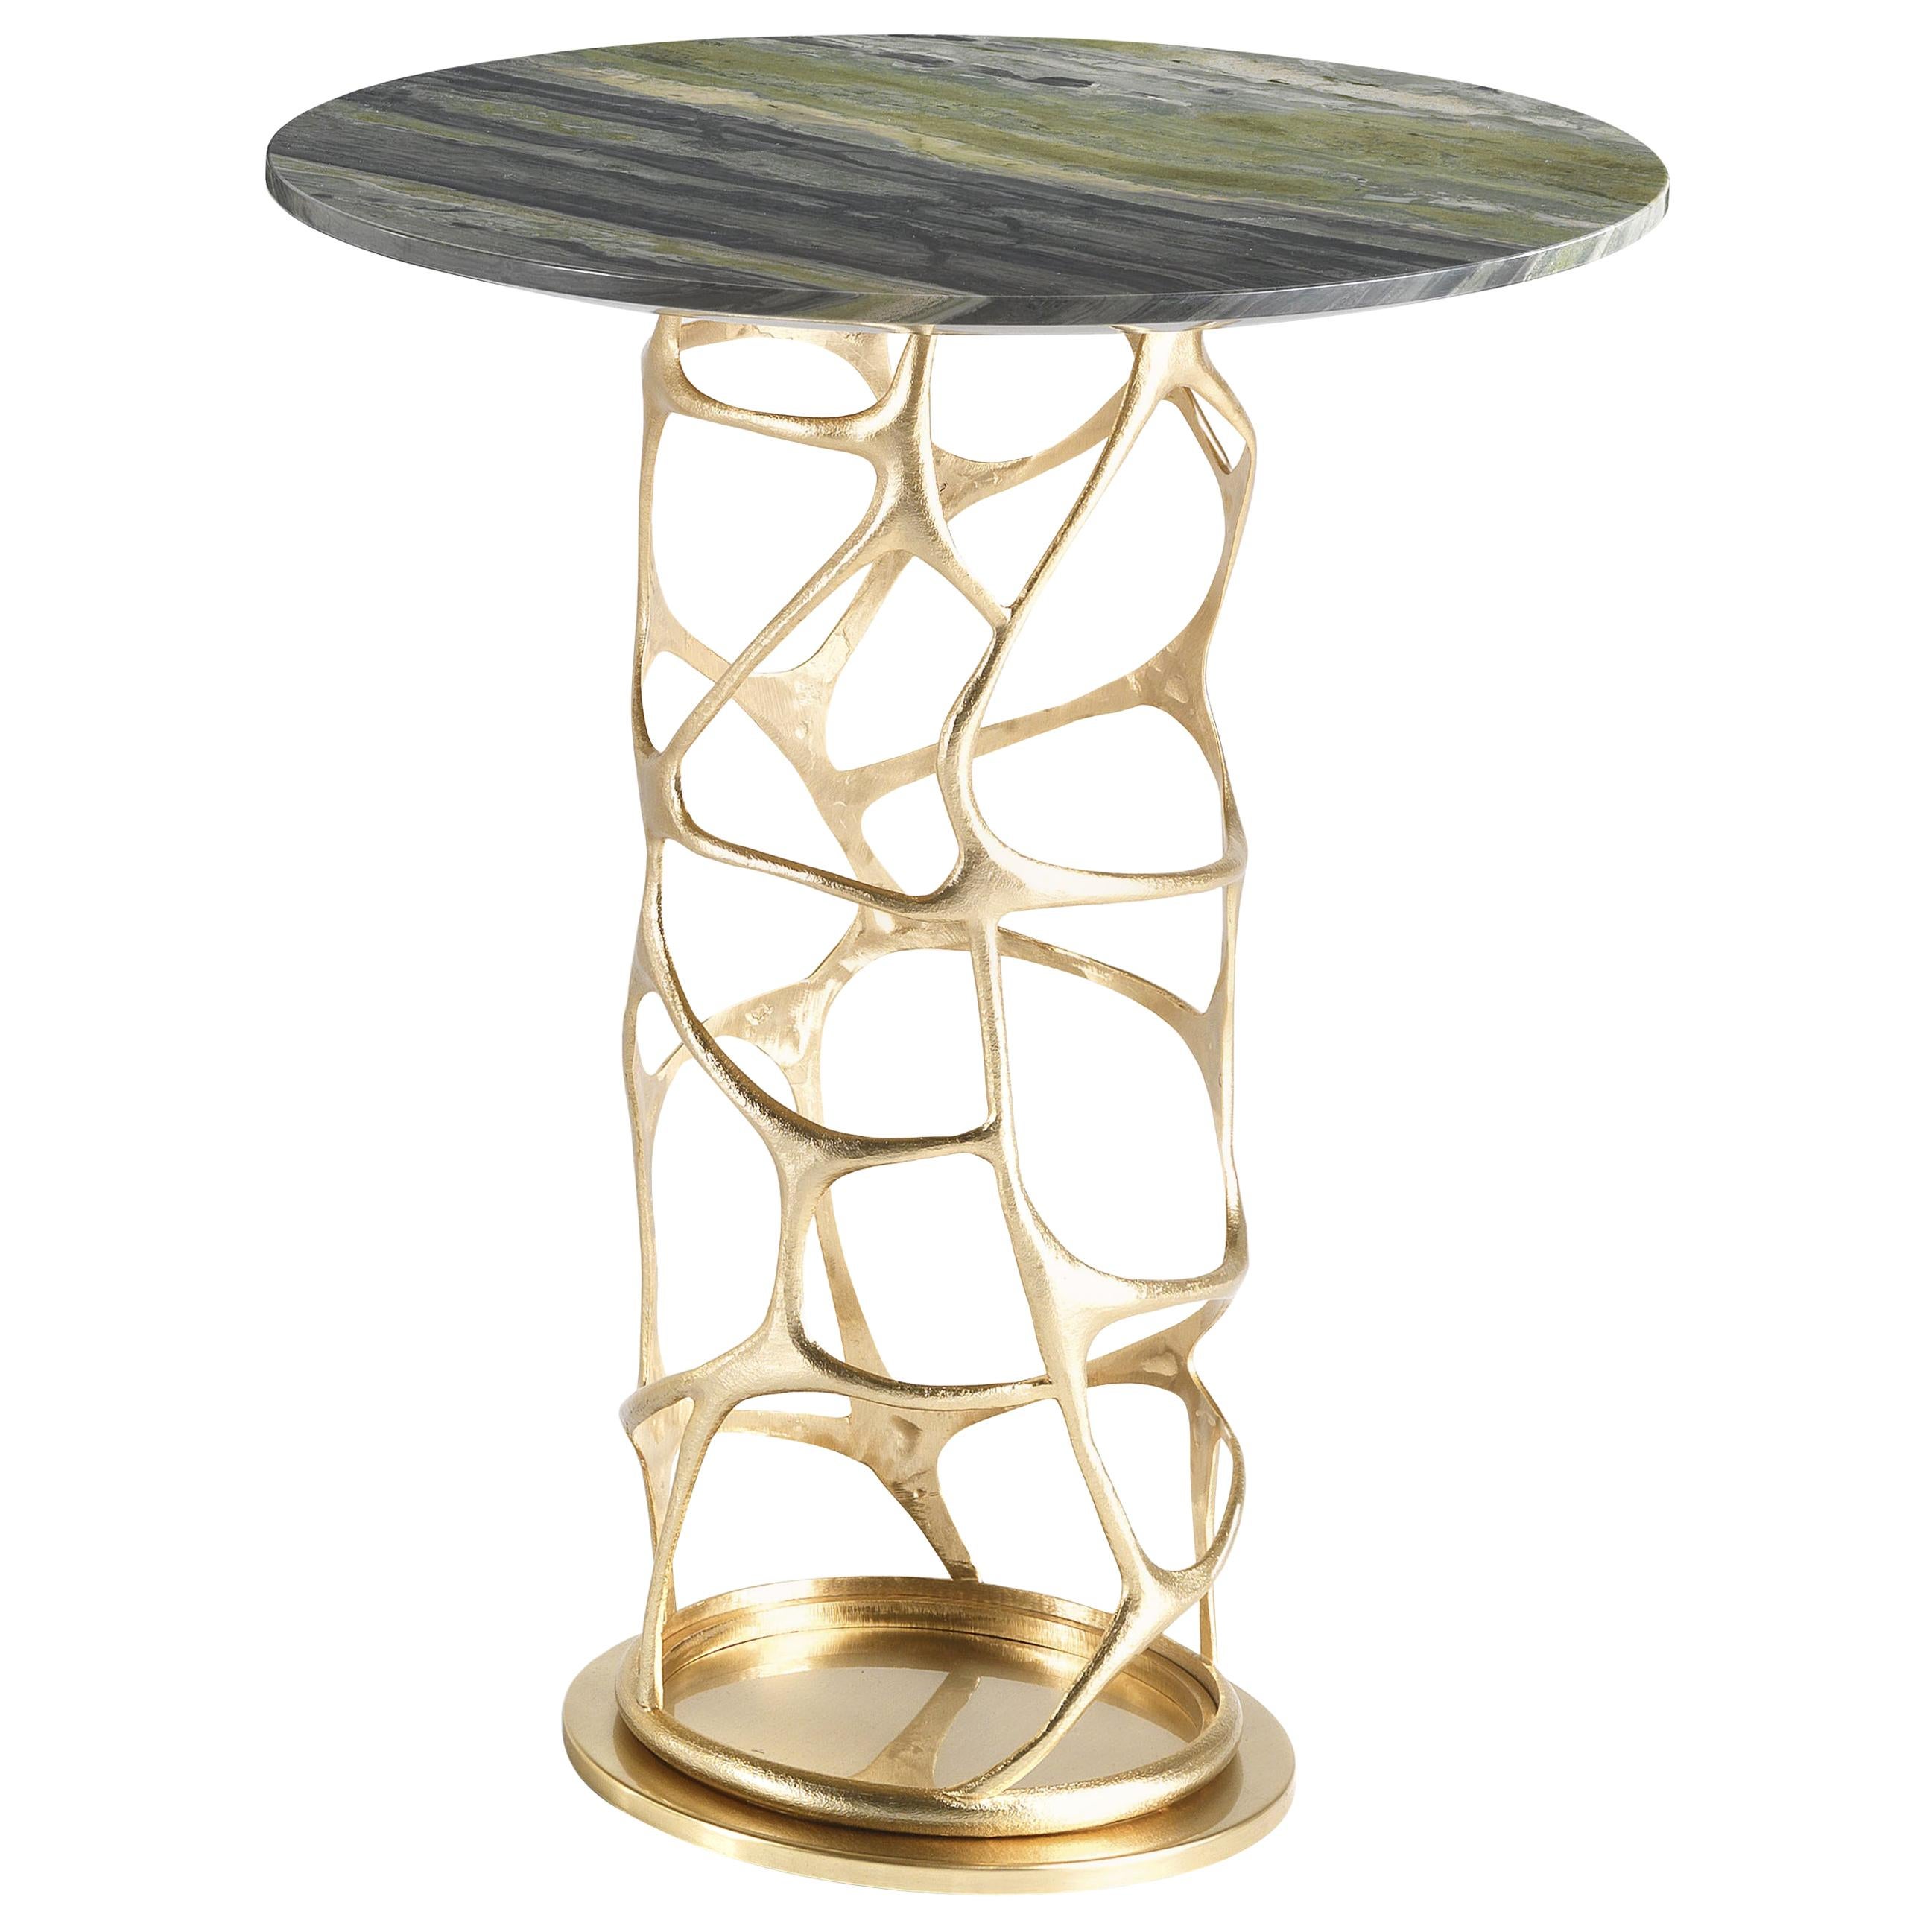 21st Century Sioraf Side Table with Marble Top by Roberto Cavalli Home Interiors